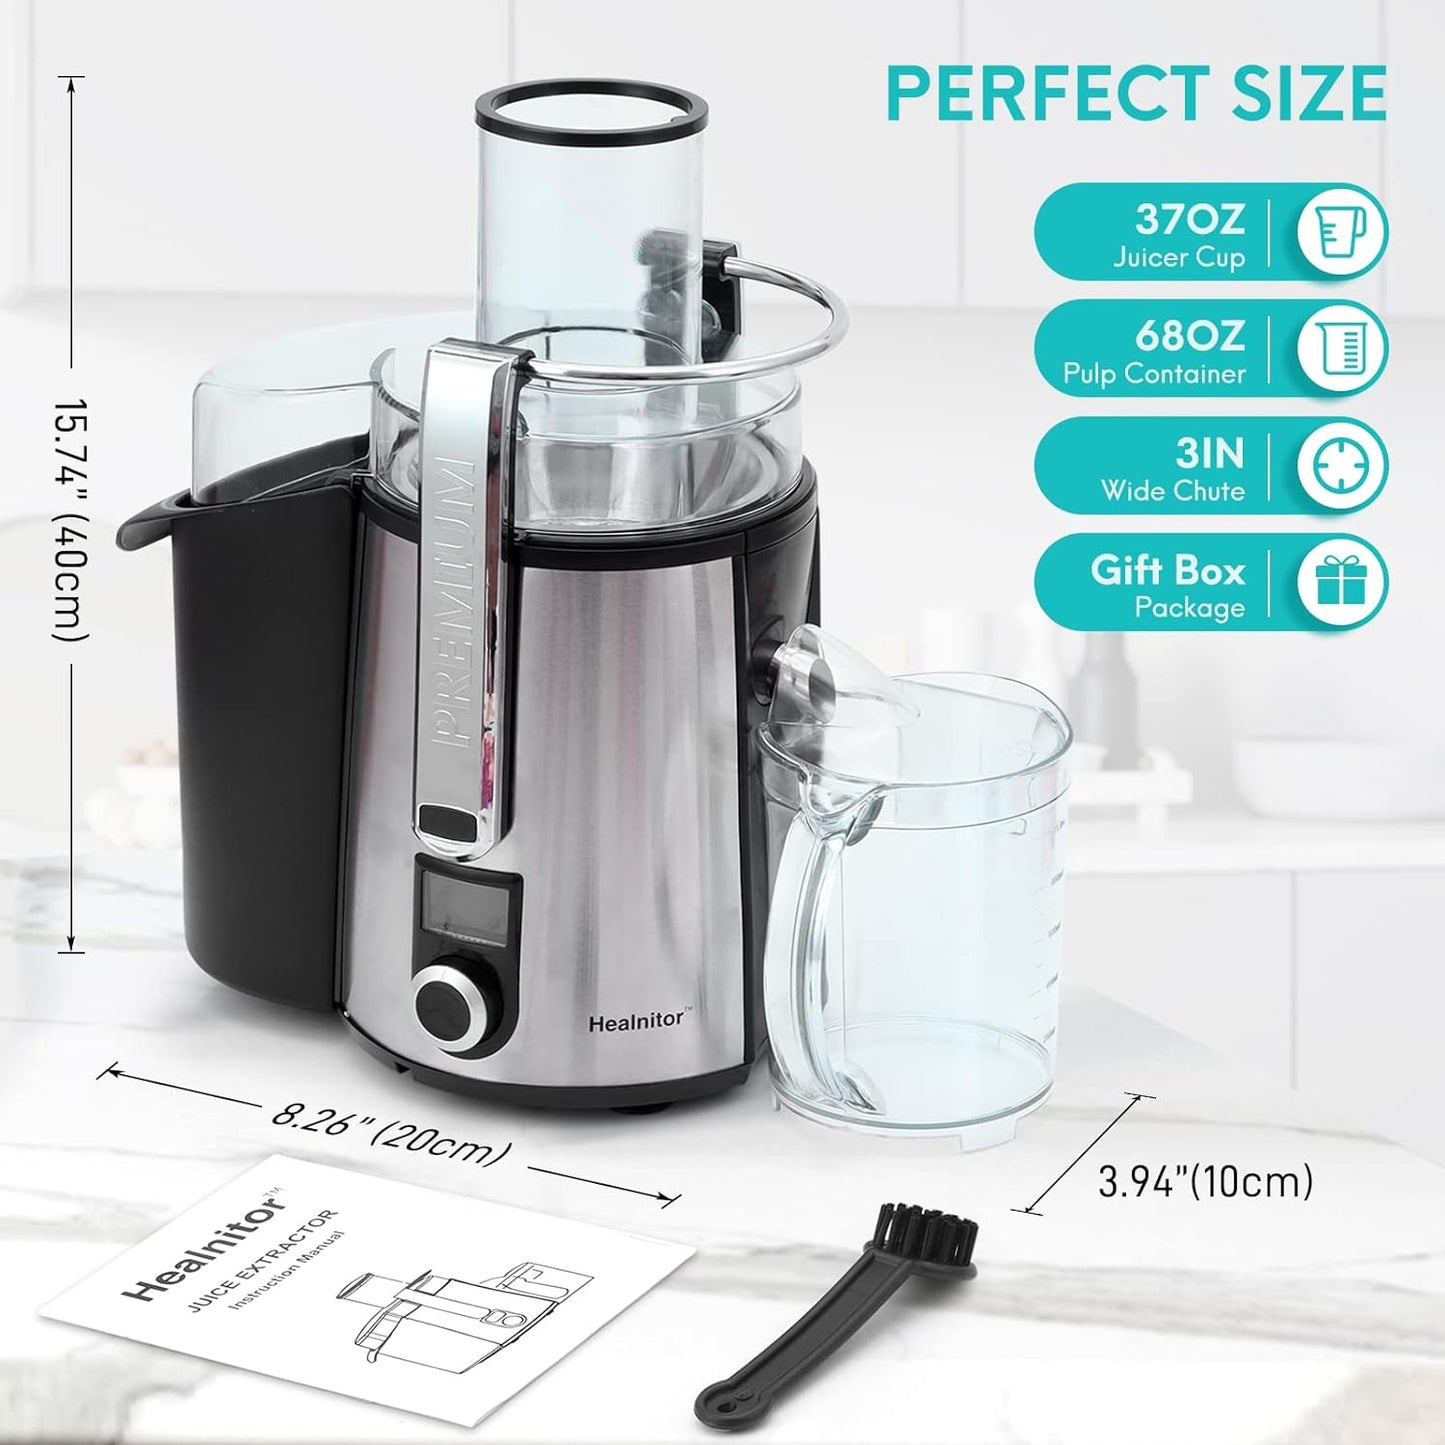 1000W 5-SPEED LCD Screen Centrifugal Juicer Machines Vegetable and Fruit, Healnitor Juice Extractor with Big Adjustable 3" Wide Chute, Easy Clean, BPA-Free, High Juice Yield, Silver